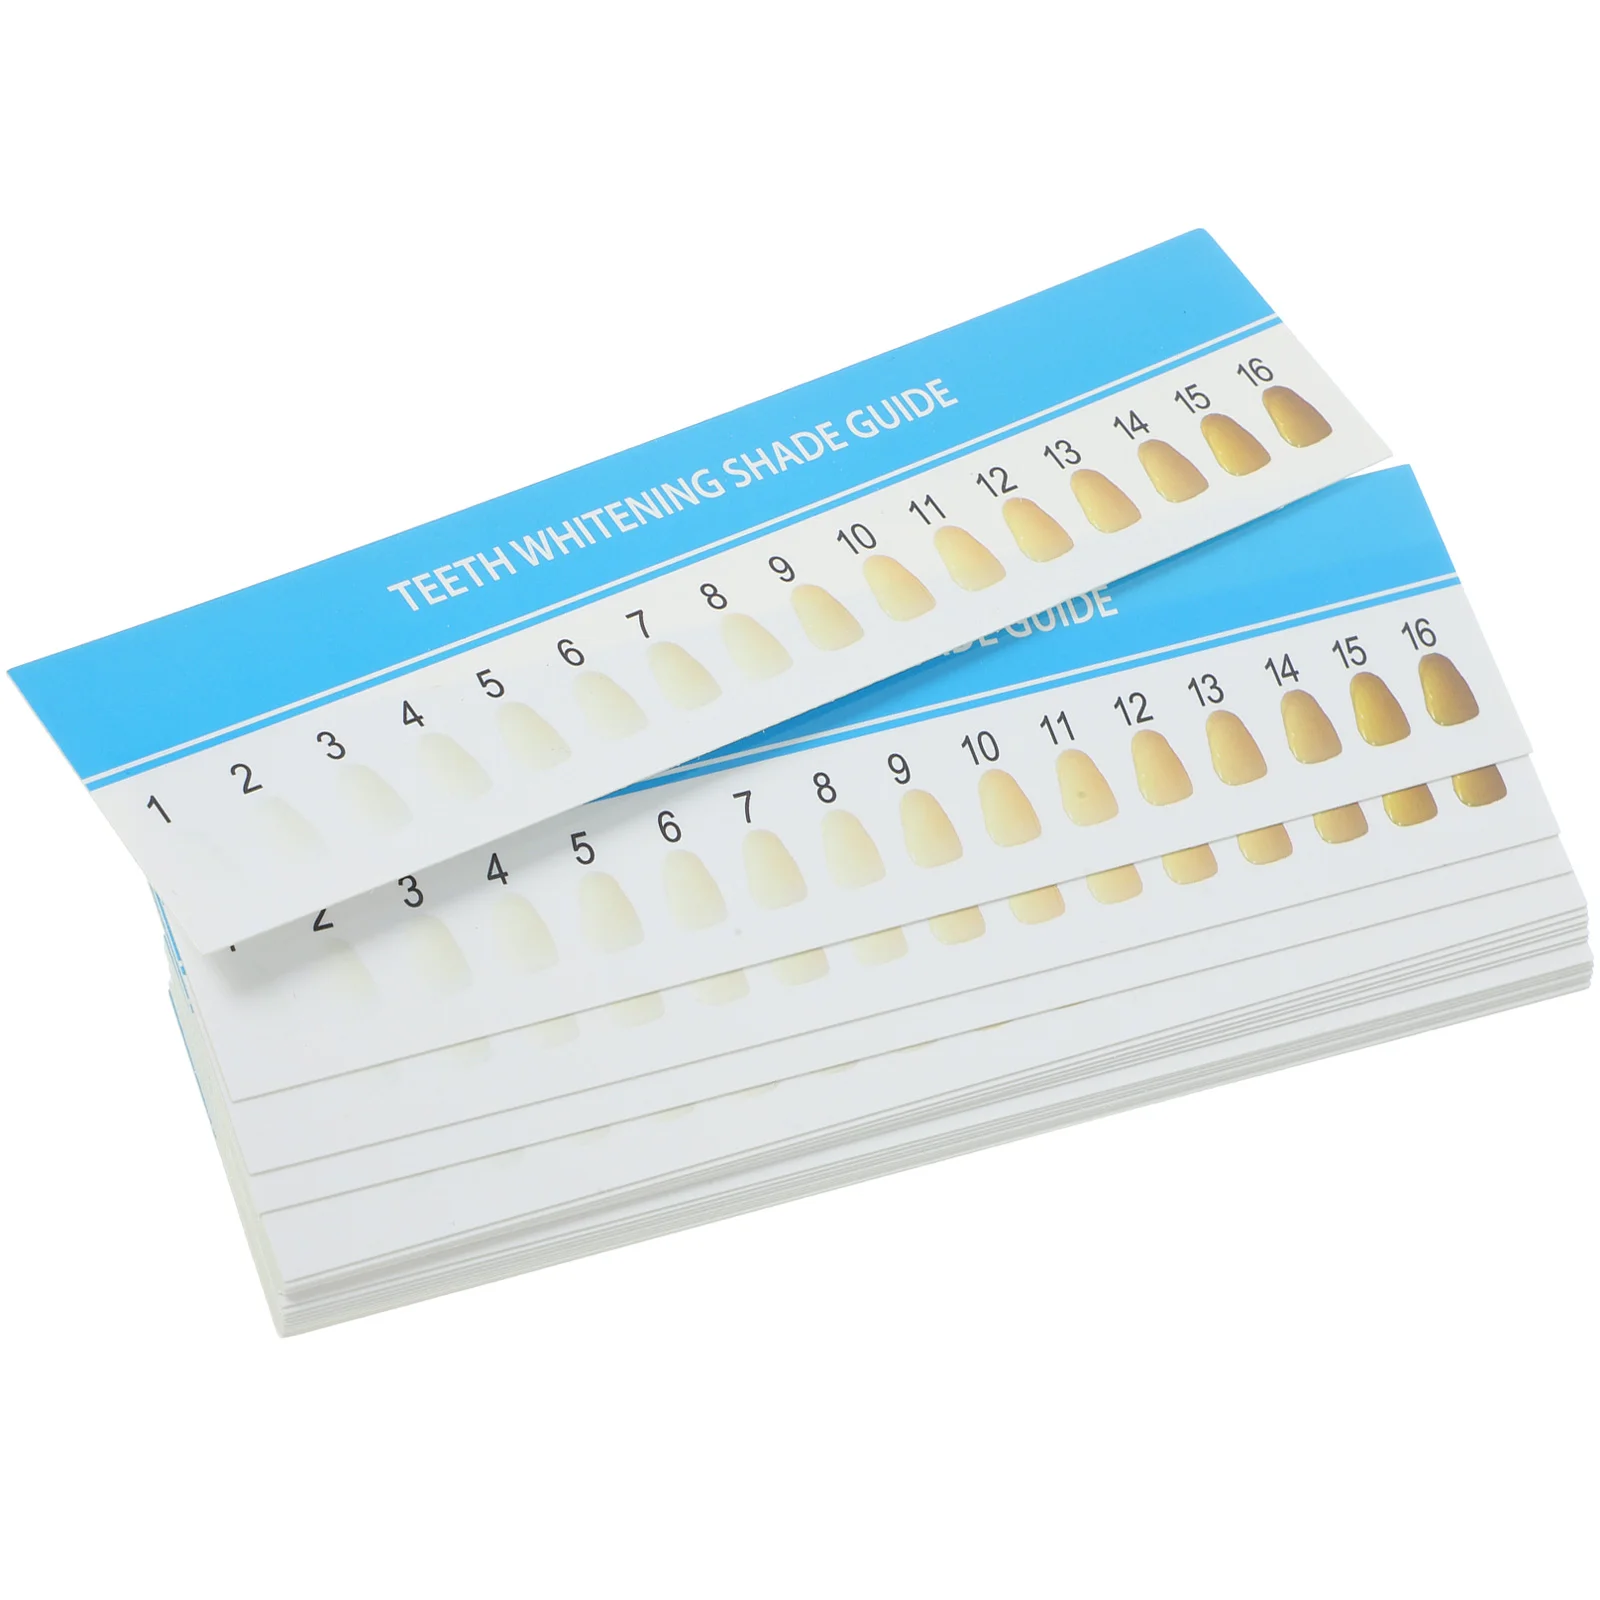 

Shade Guide Bleaching Shade Chart Color Comparing for Professional or Household Care 20pcs